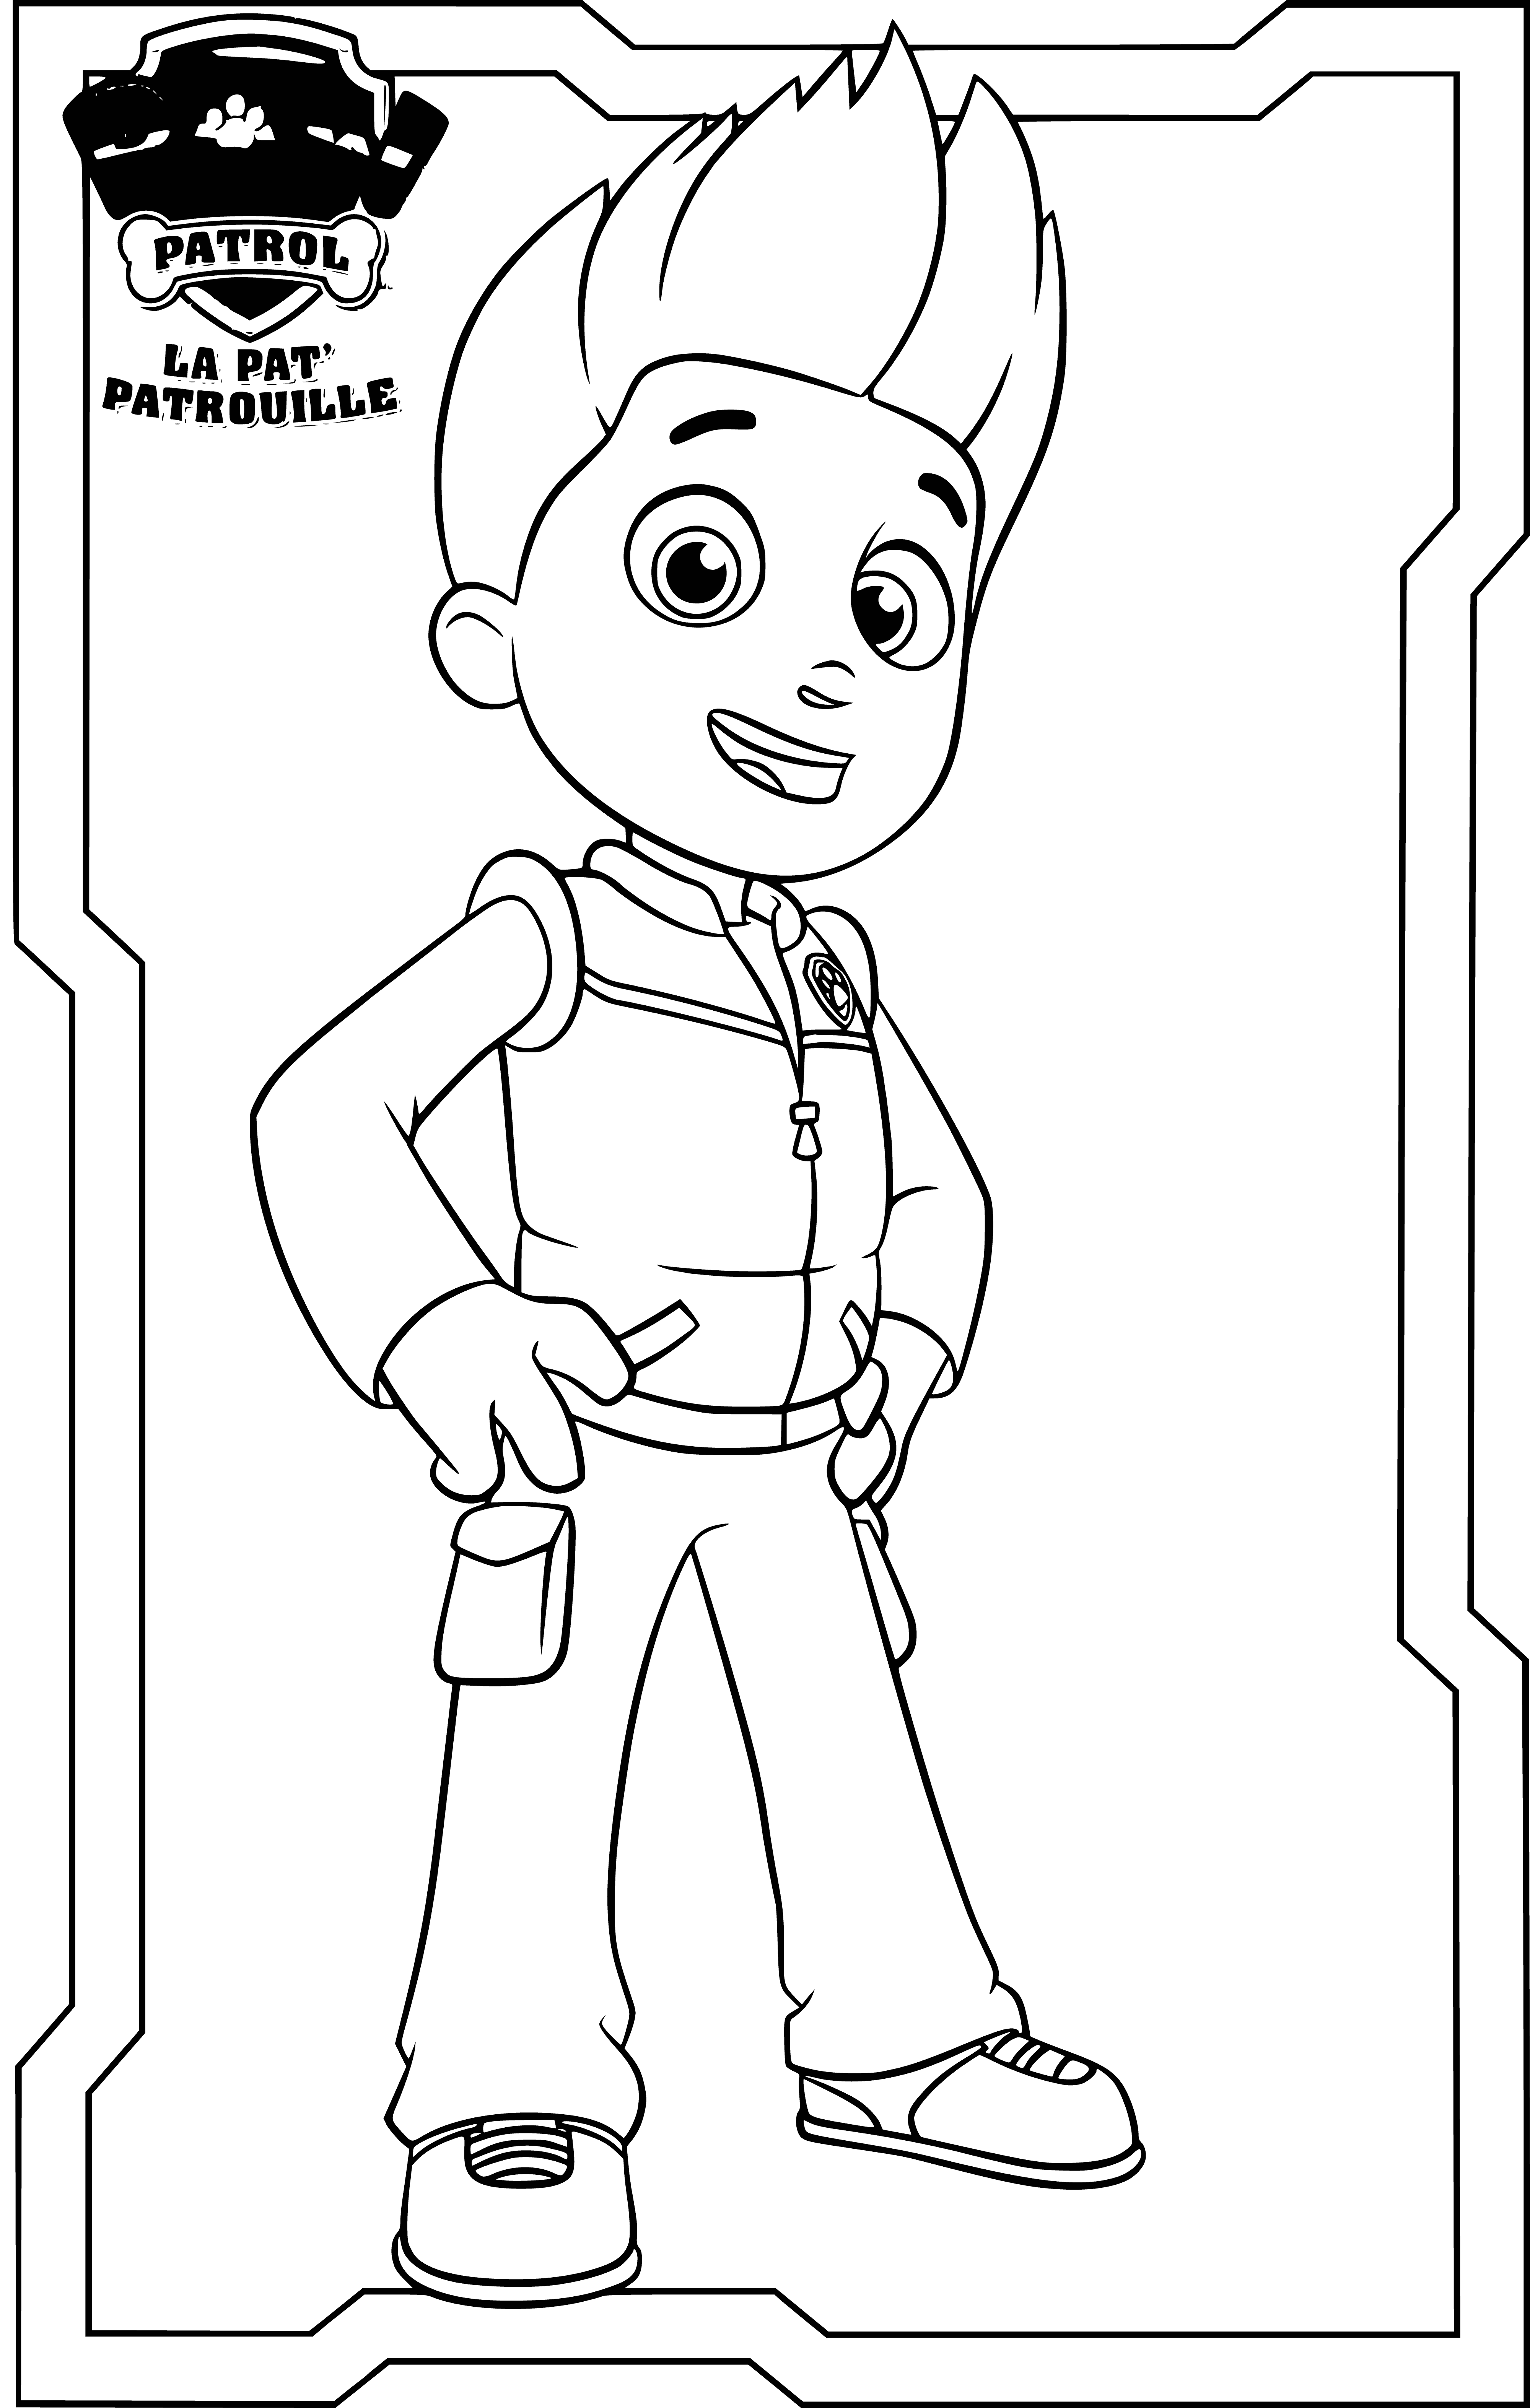 Rider coloring page